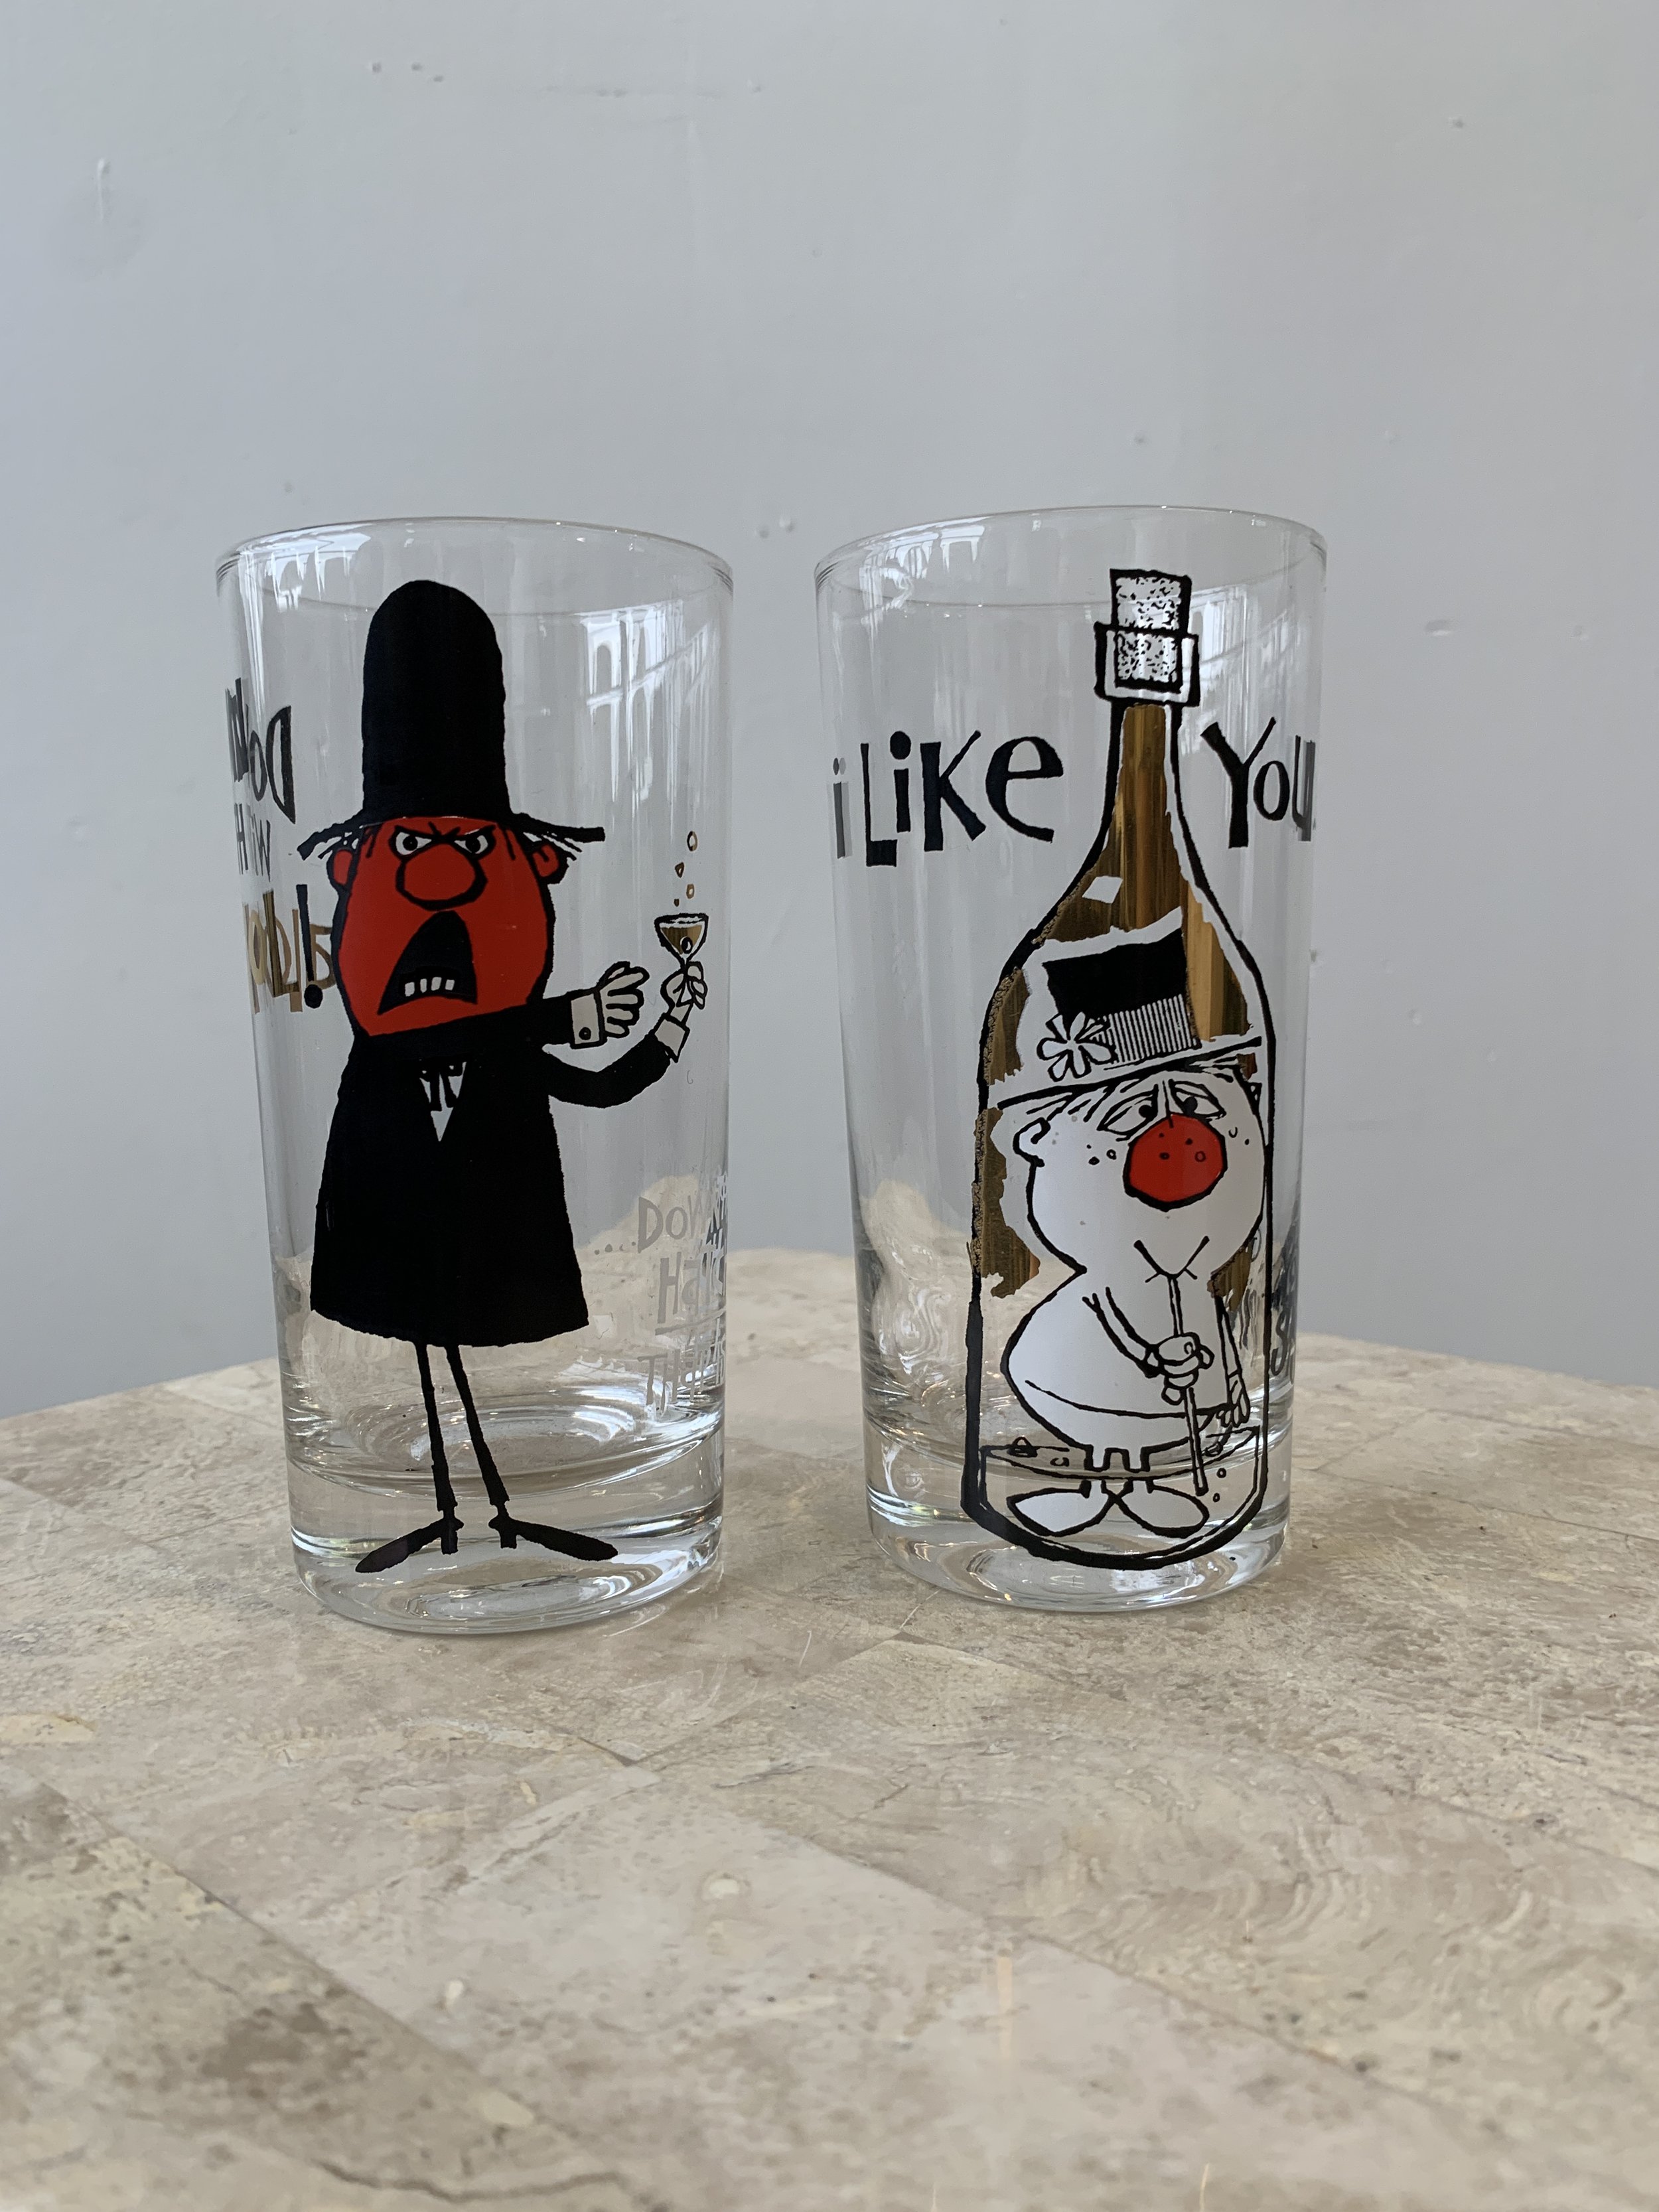 Mocktail / Cocktail Glasses – The Glass Couture